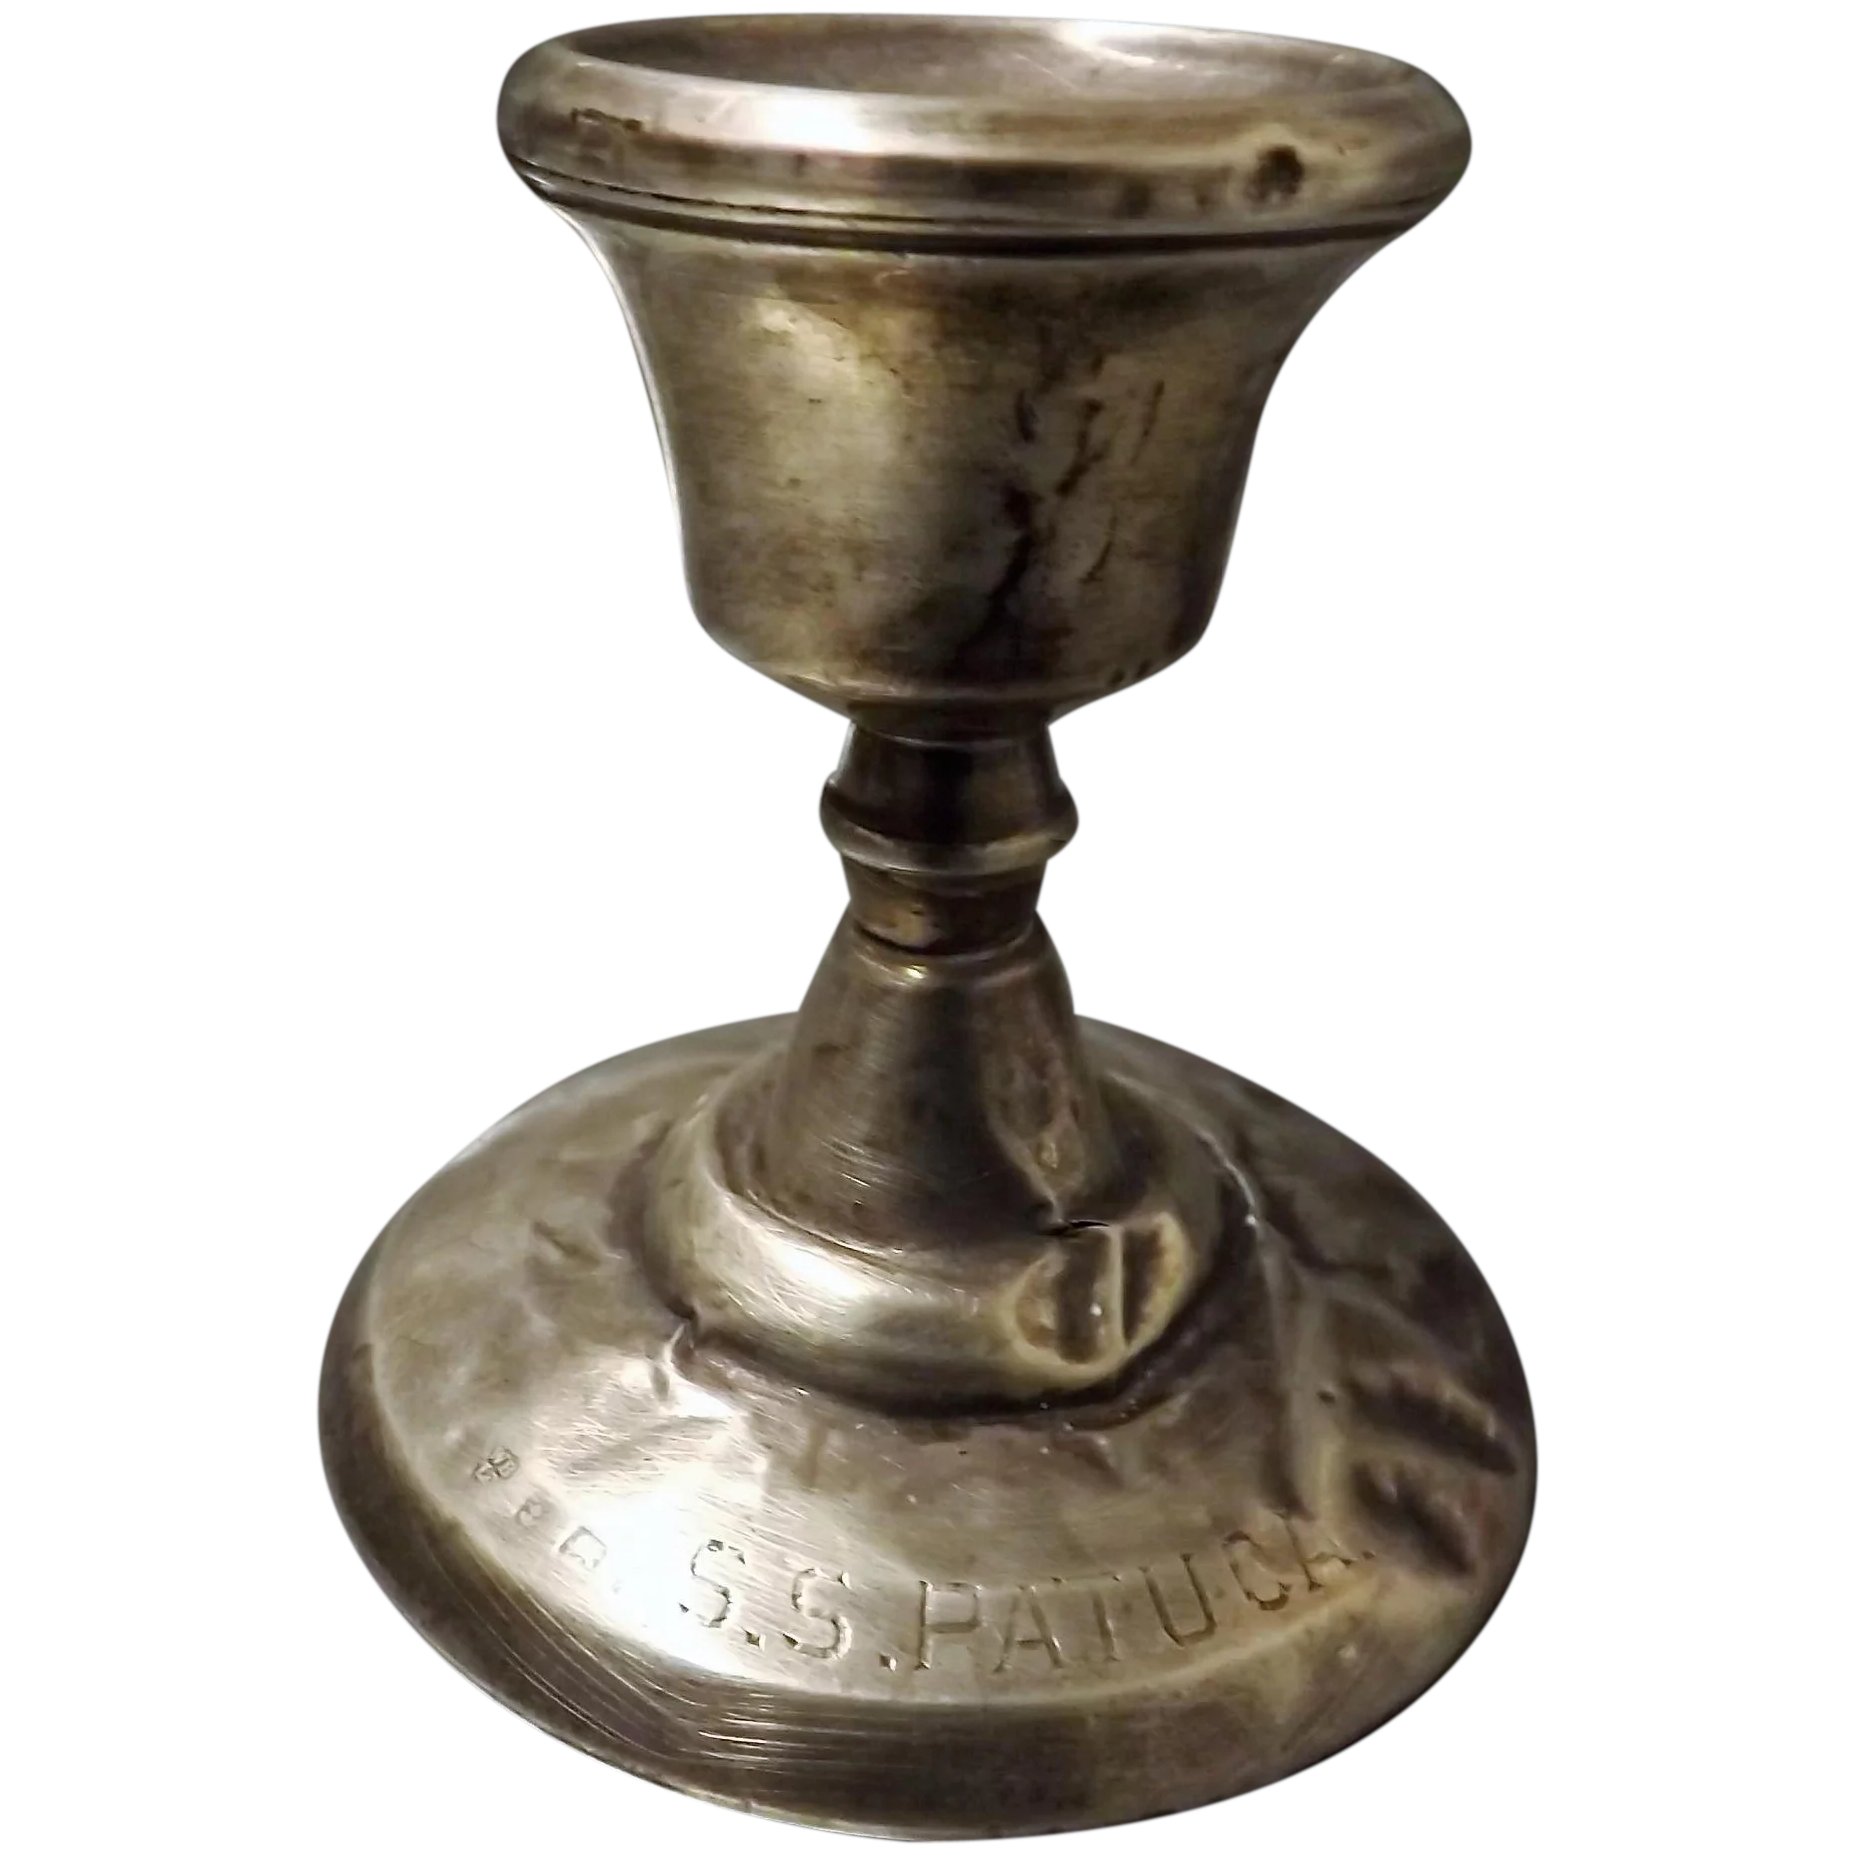 Small Silver Candle Stick From The S.S. PATUCA - Hallmarked 1925